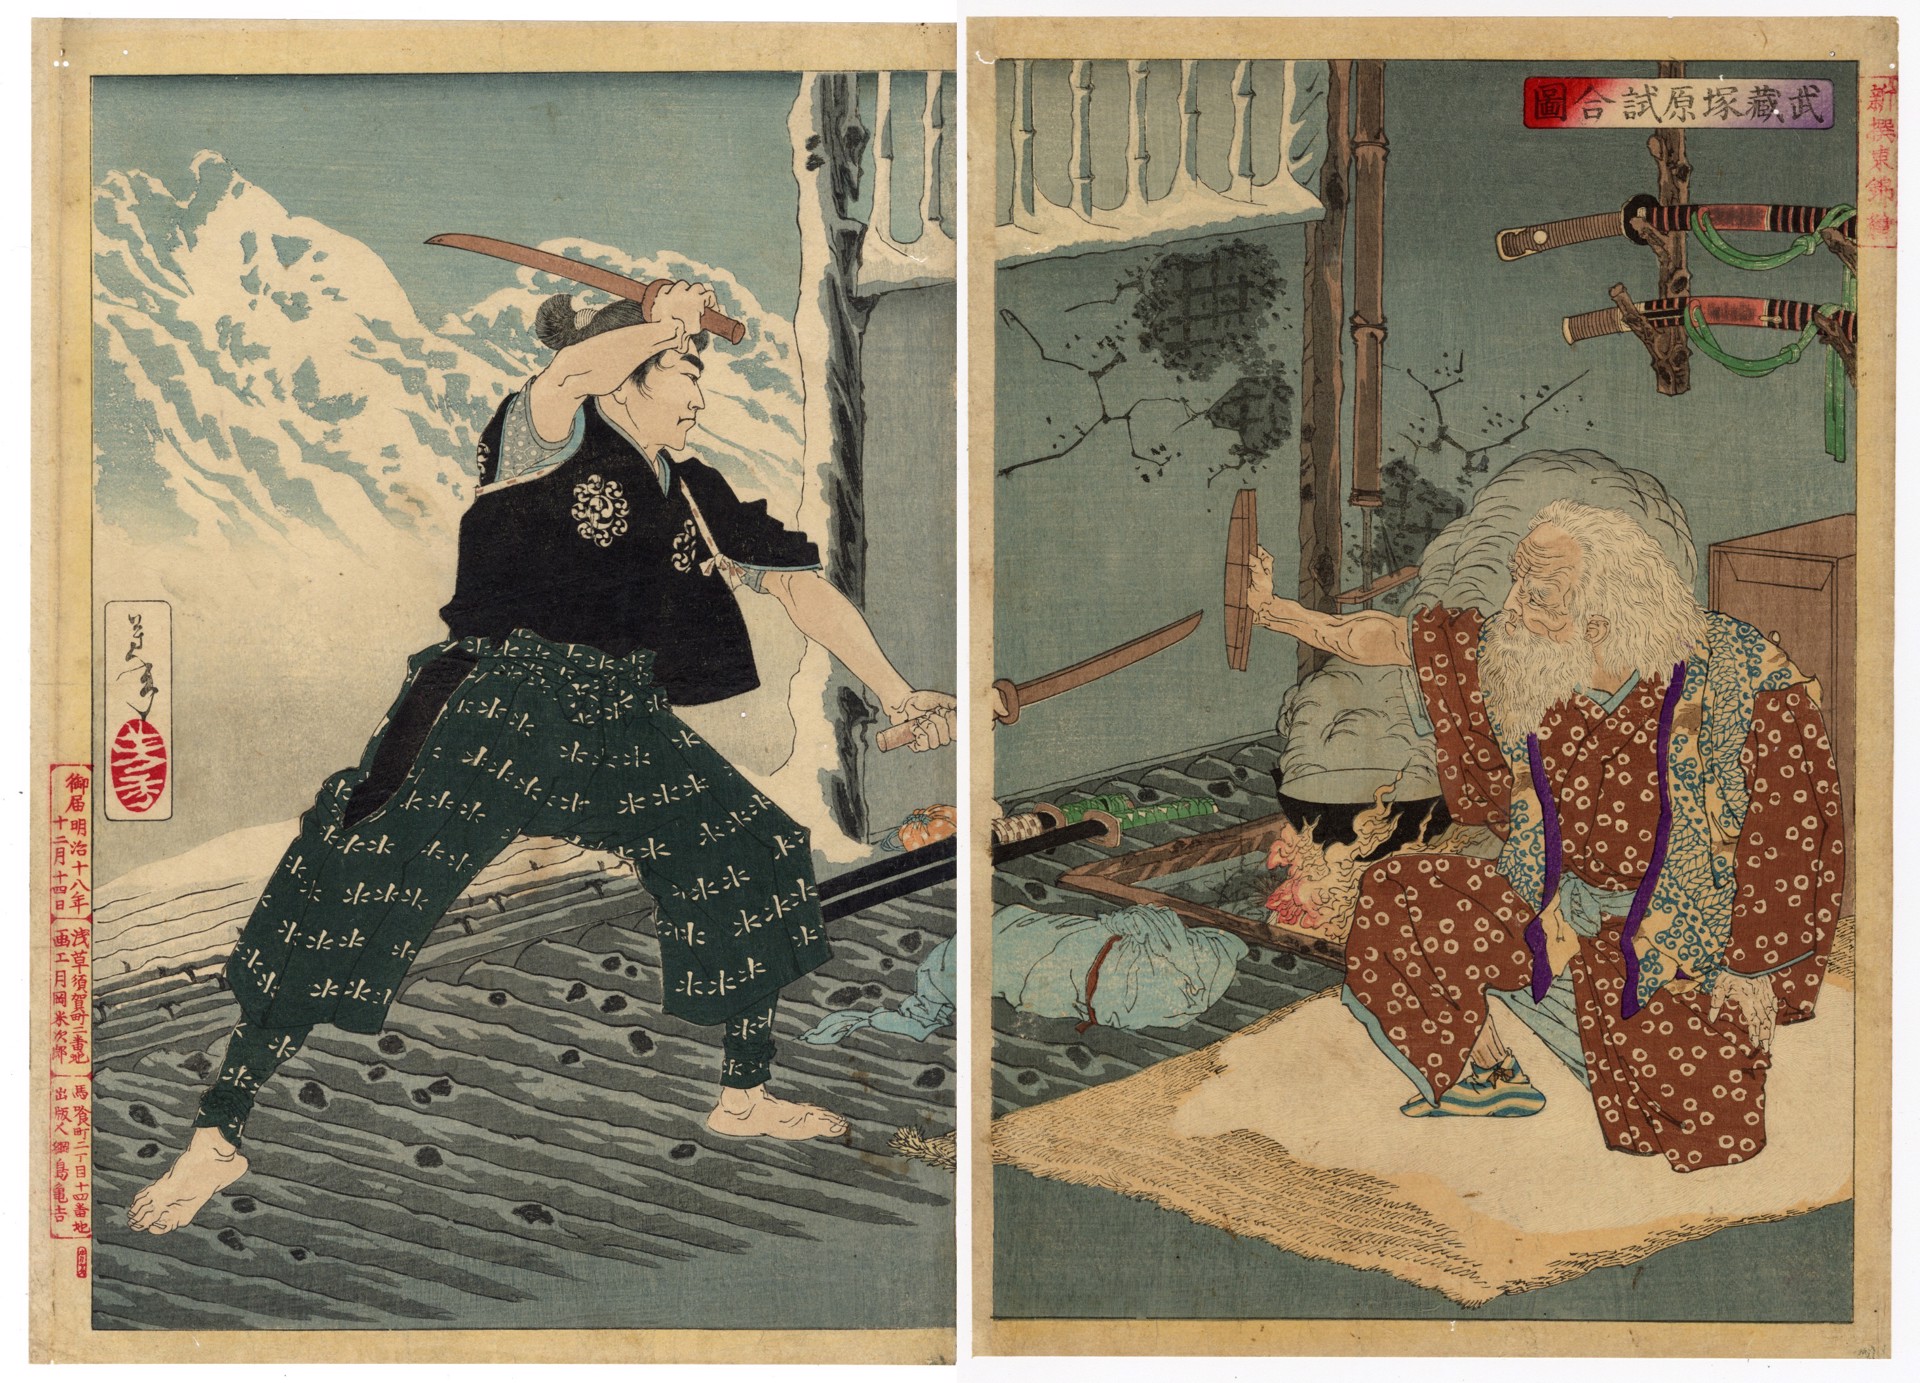 Duel Between Miyamoto Musashi, Holding Two Wooden Swords and the Old Master Tsukihara Bokuden, who uses a Wooden Pot Lid in Defense by Yoshitoshi